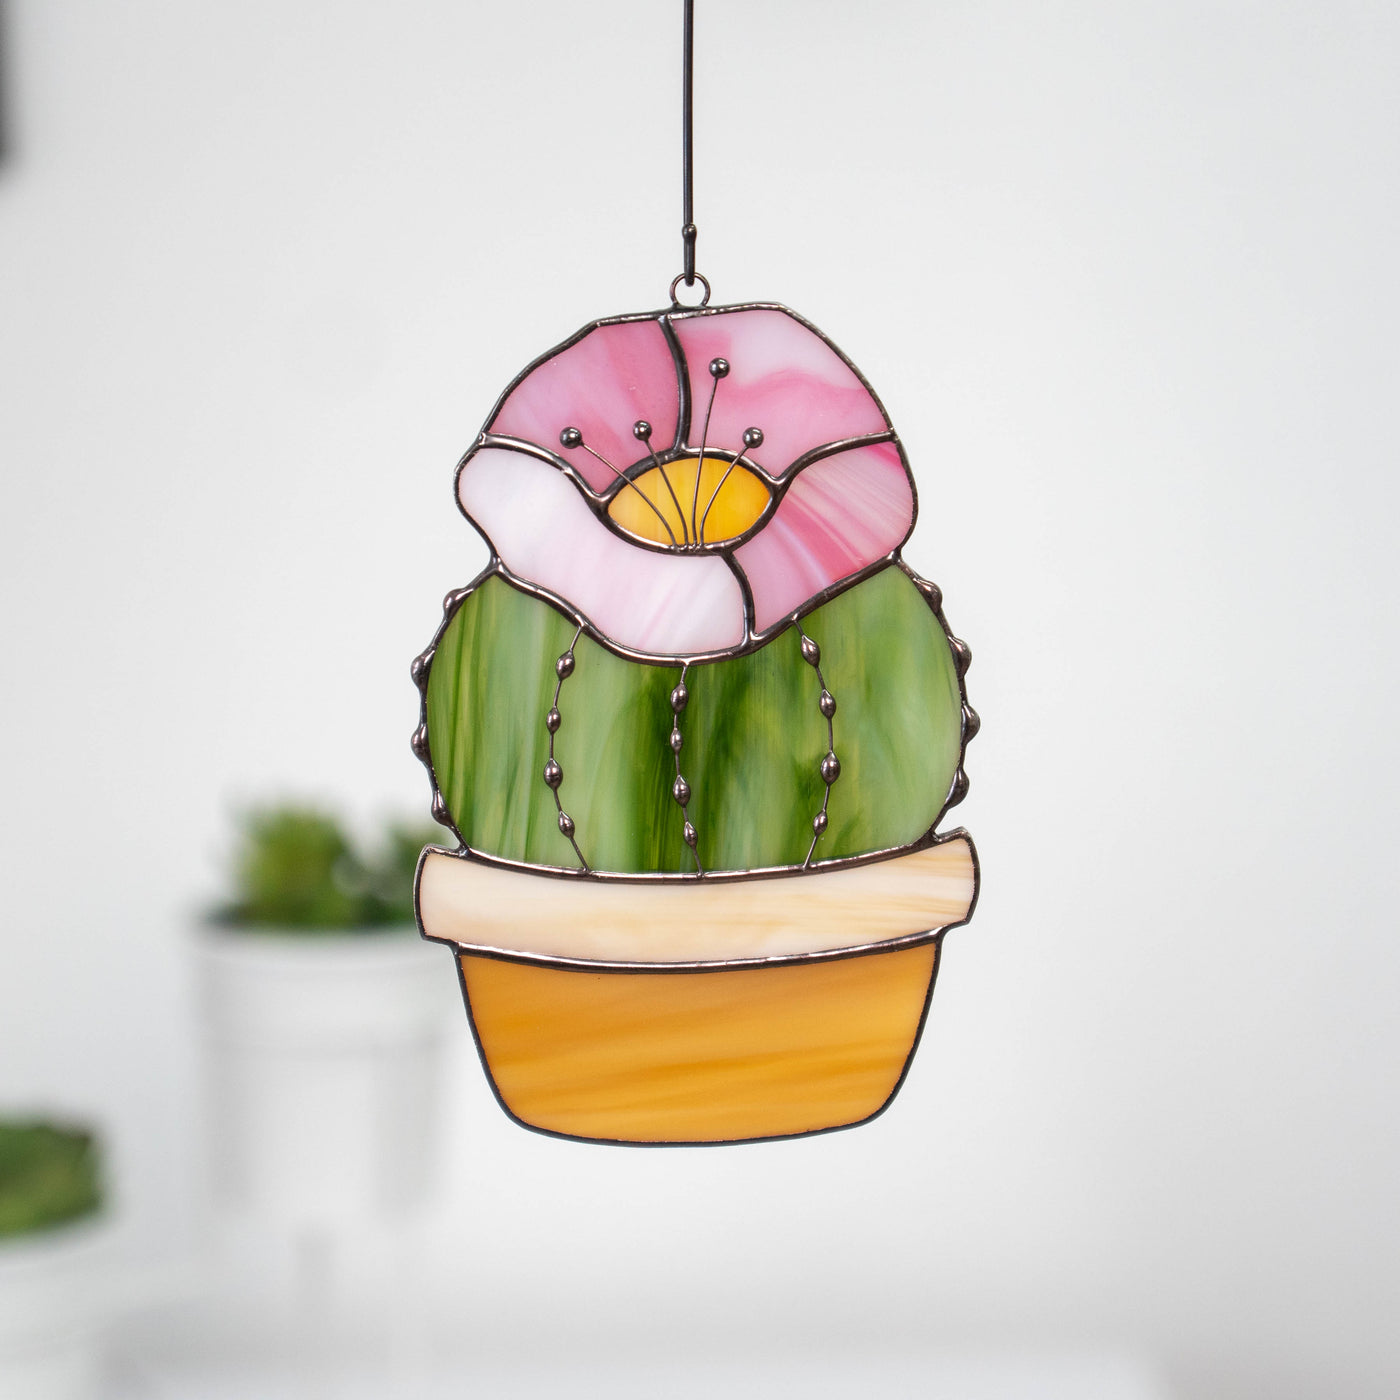 Stained glass cactus suncatcher with pink flower on top 